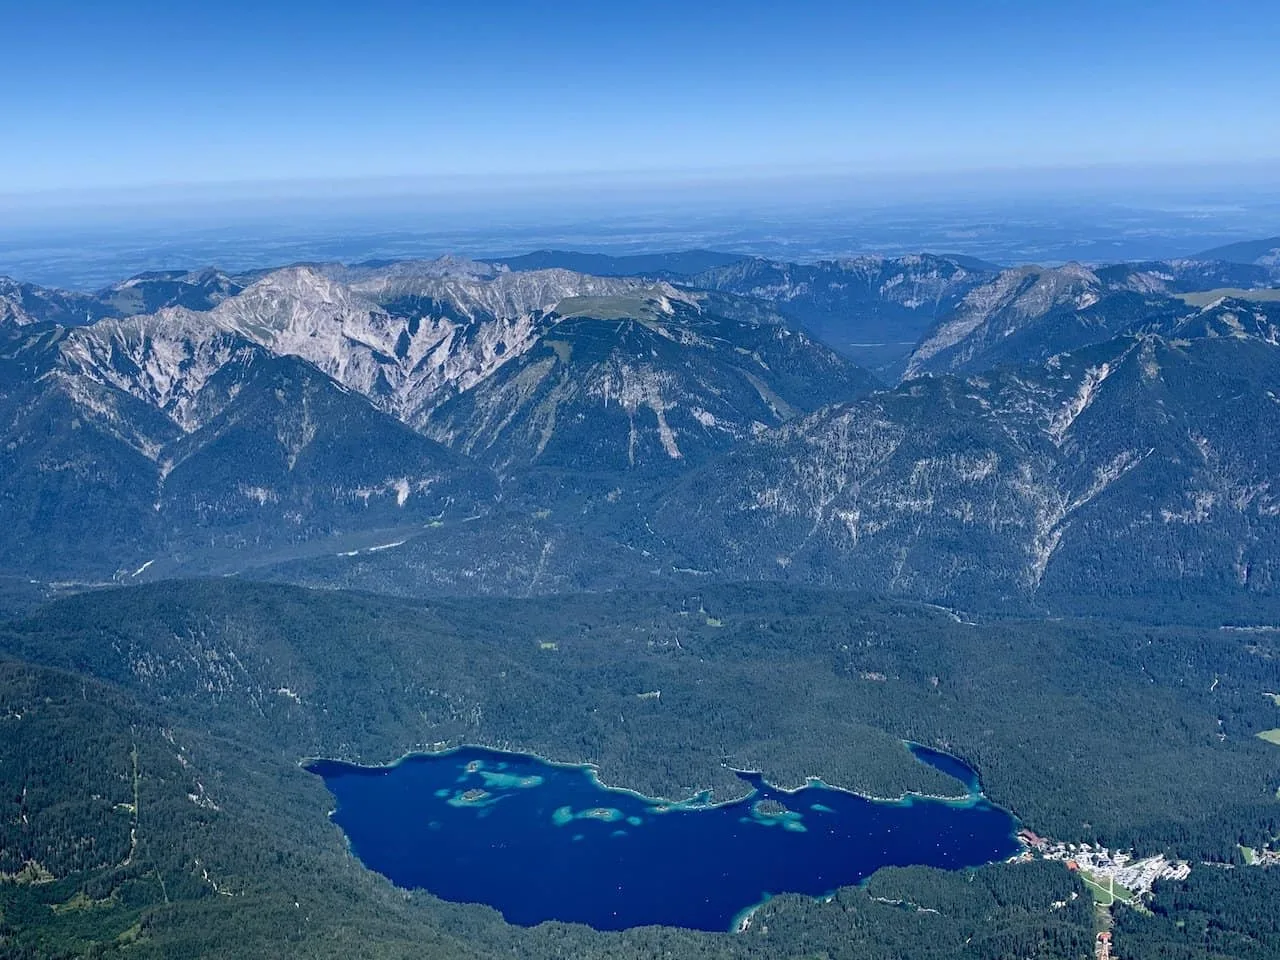 Eibsee Lake from Above